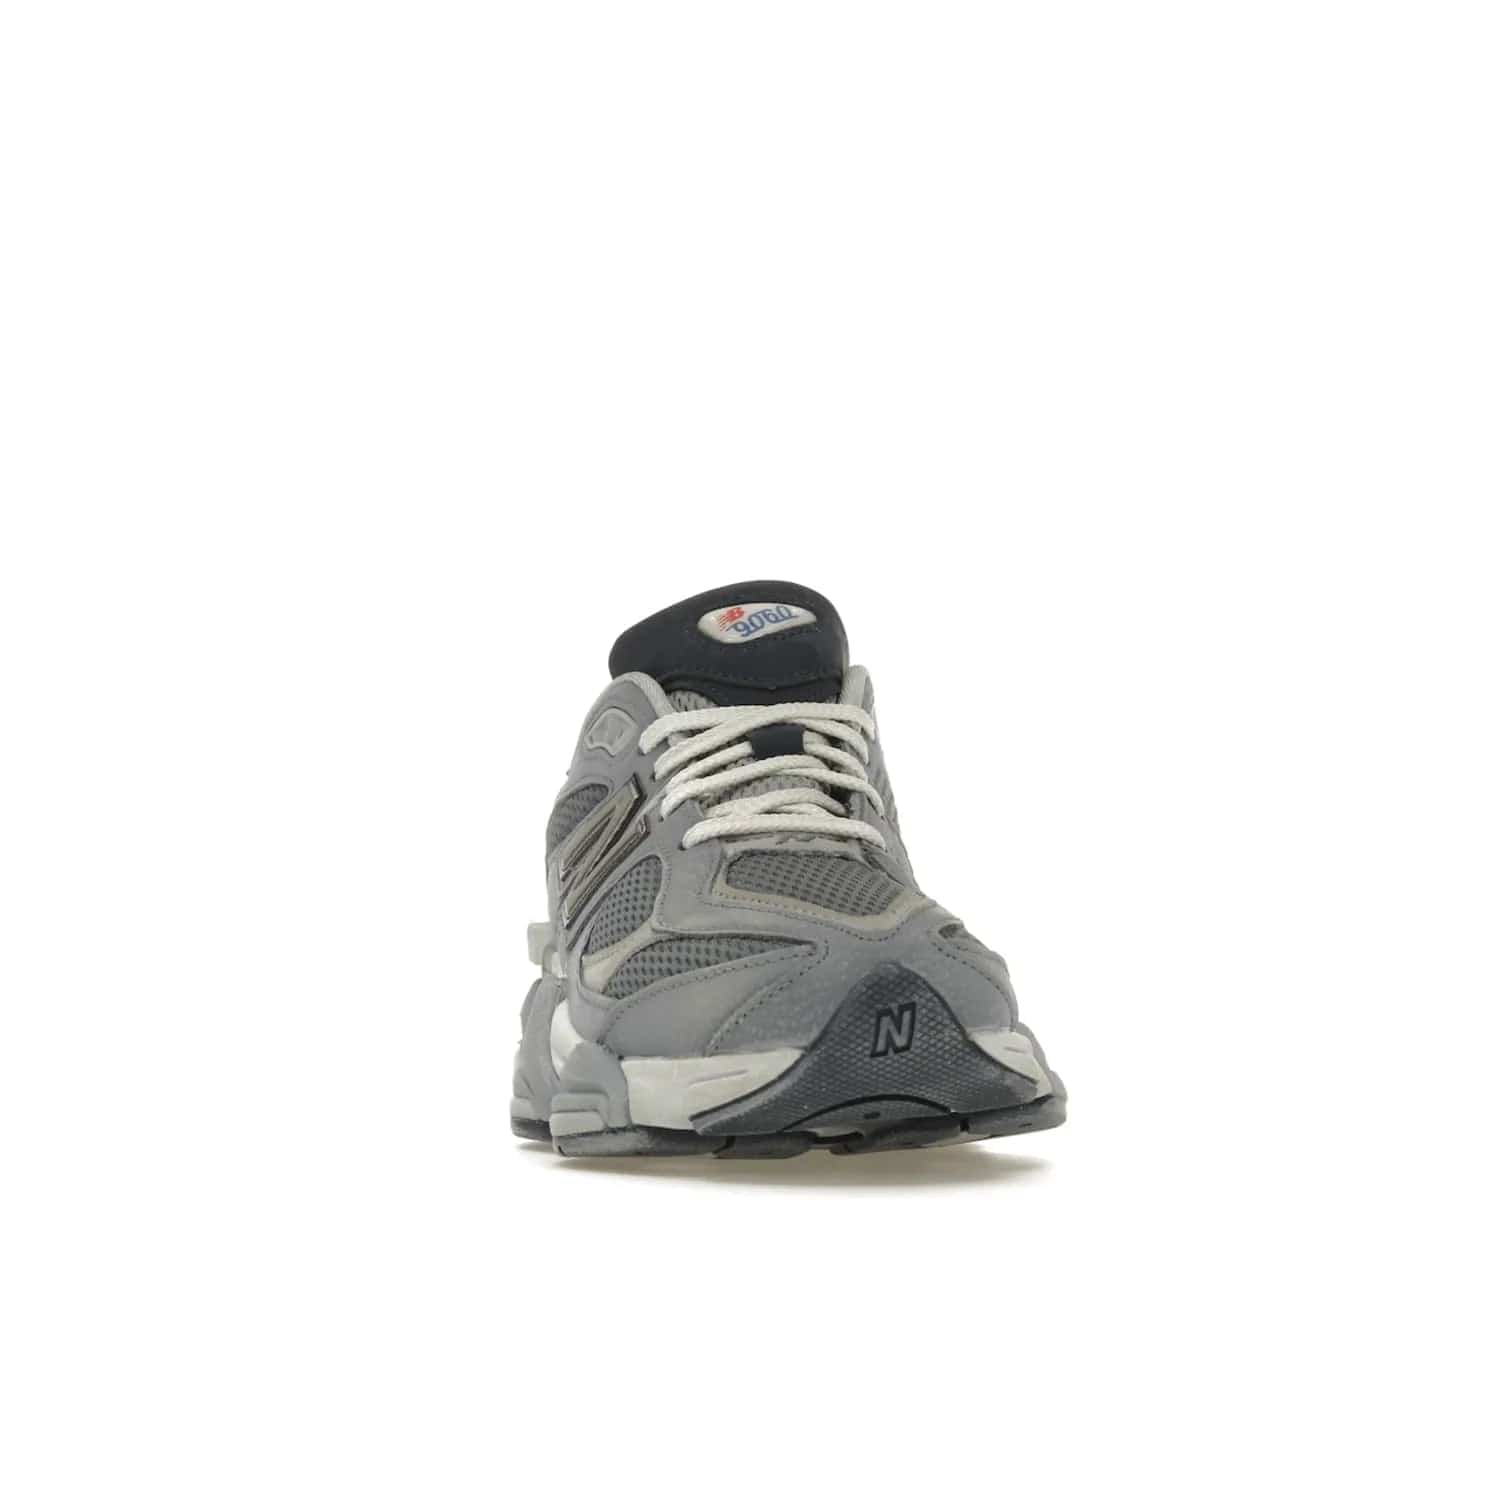 New Balance 9060 Grey Day (2023) - Image 9 - Only at www.BallersClubKickz.com - #
Sporty-meets-stylish in the New Balance 9060 Grey Day sneaker. Designed with Arctic Grey, Steel, and Silver Metallic, it offers an edgy but wearable look along with classic NB comfort and quality.